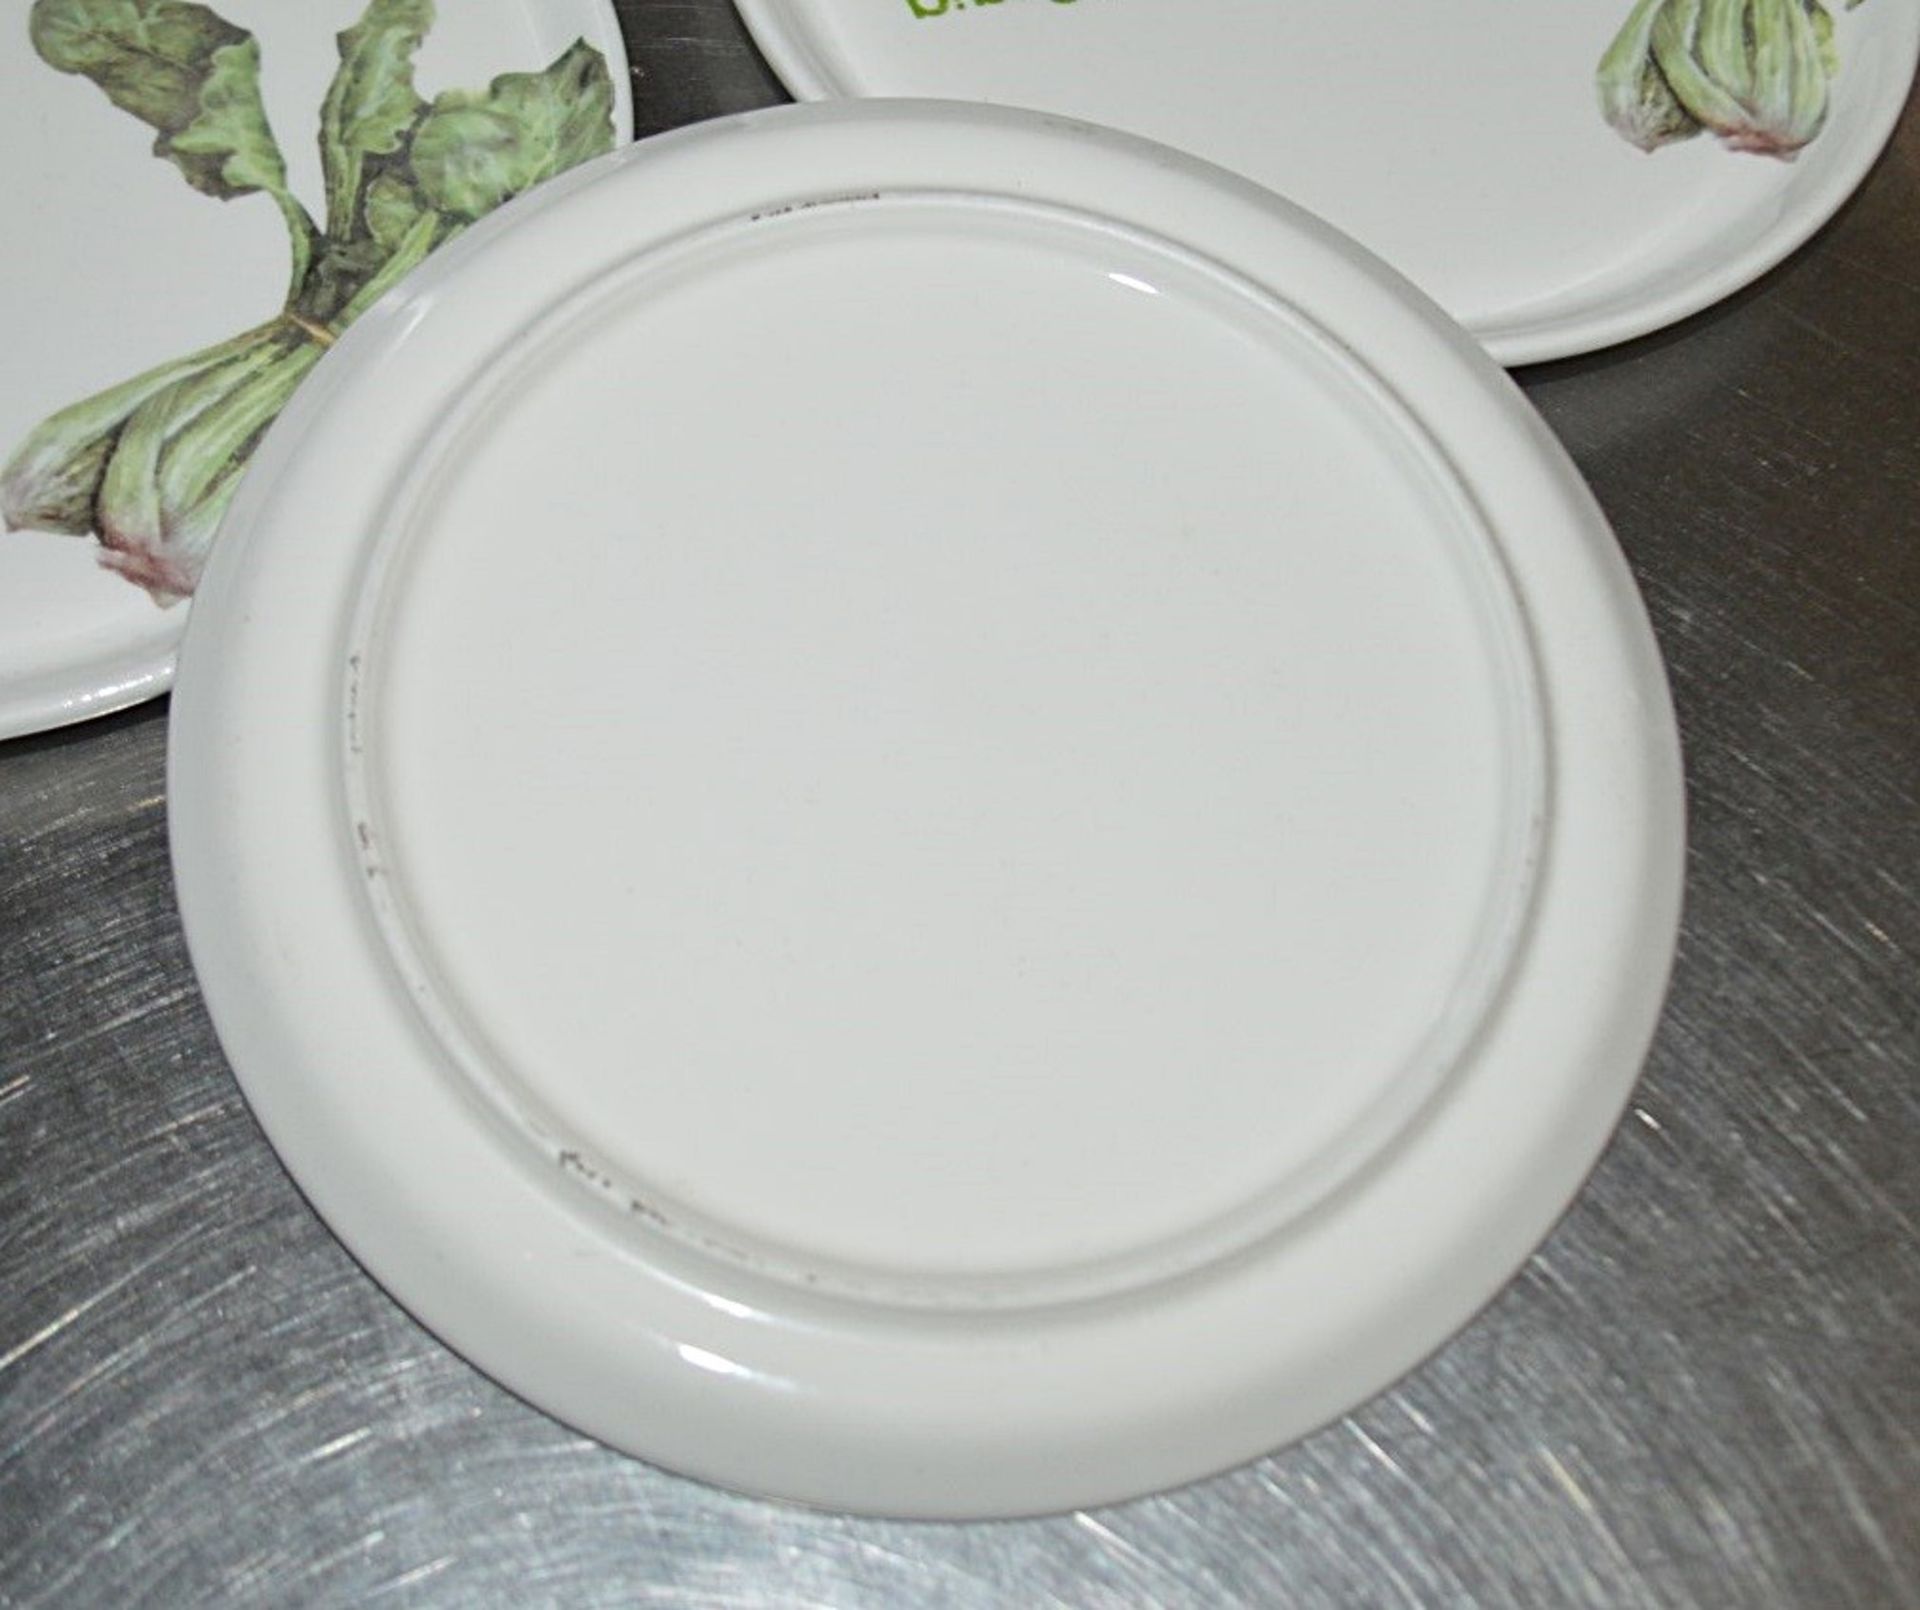 50 x BIBIGO Branded Fine Dining Plates - 16.5cm - Pre-owned, From A London Restaurant - Ref: WH1 - Image 3 of 5